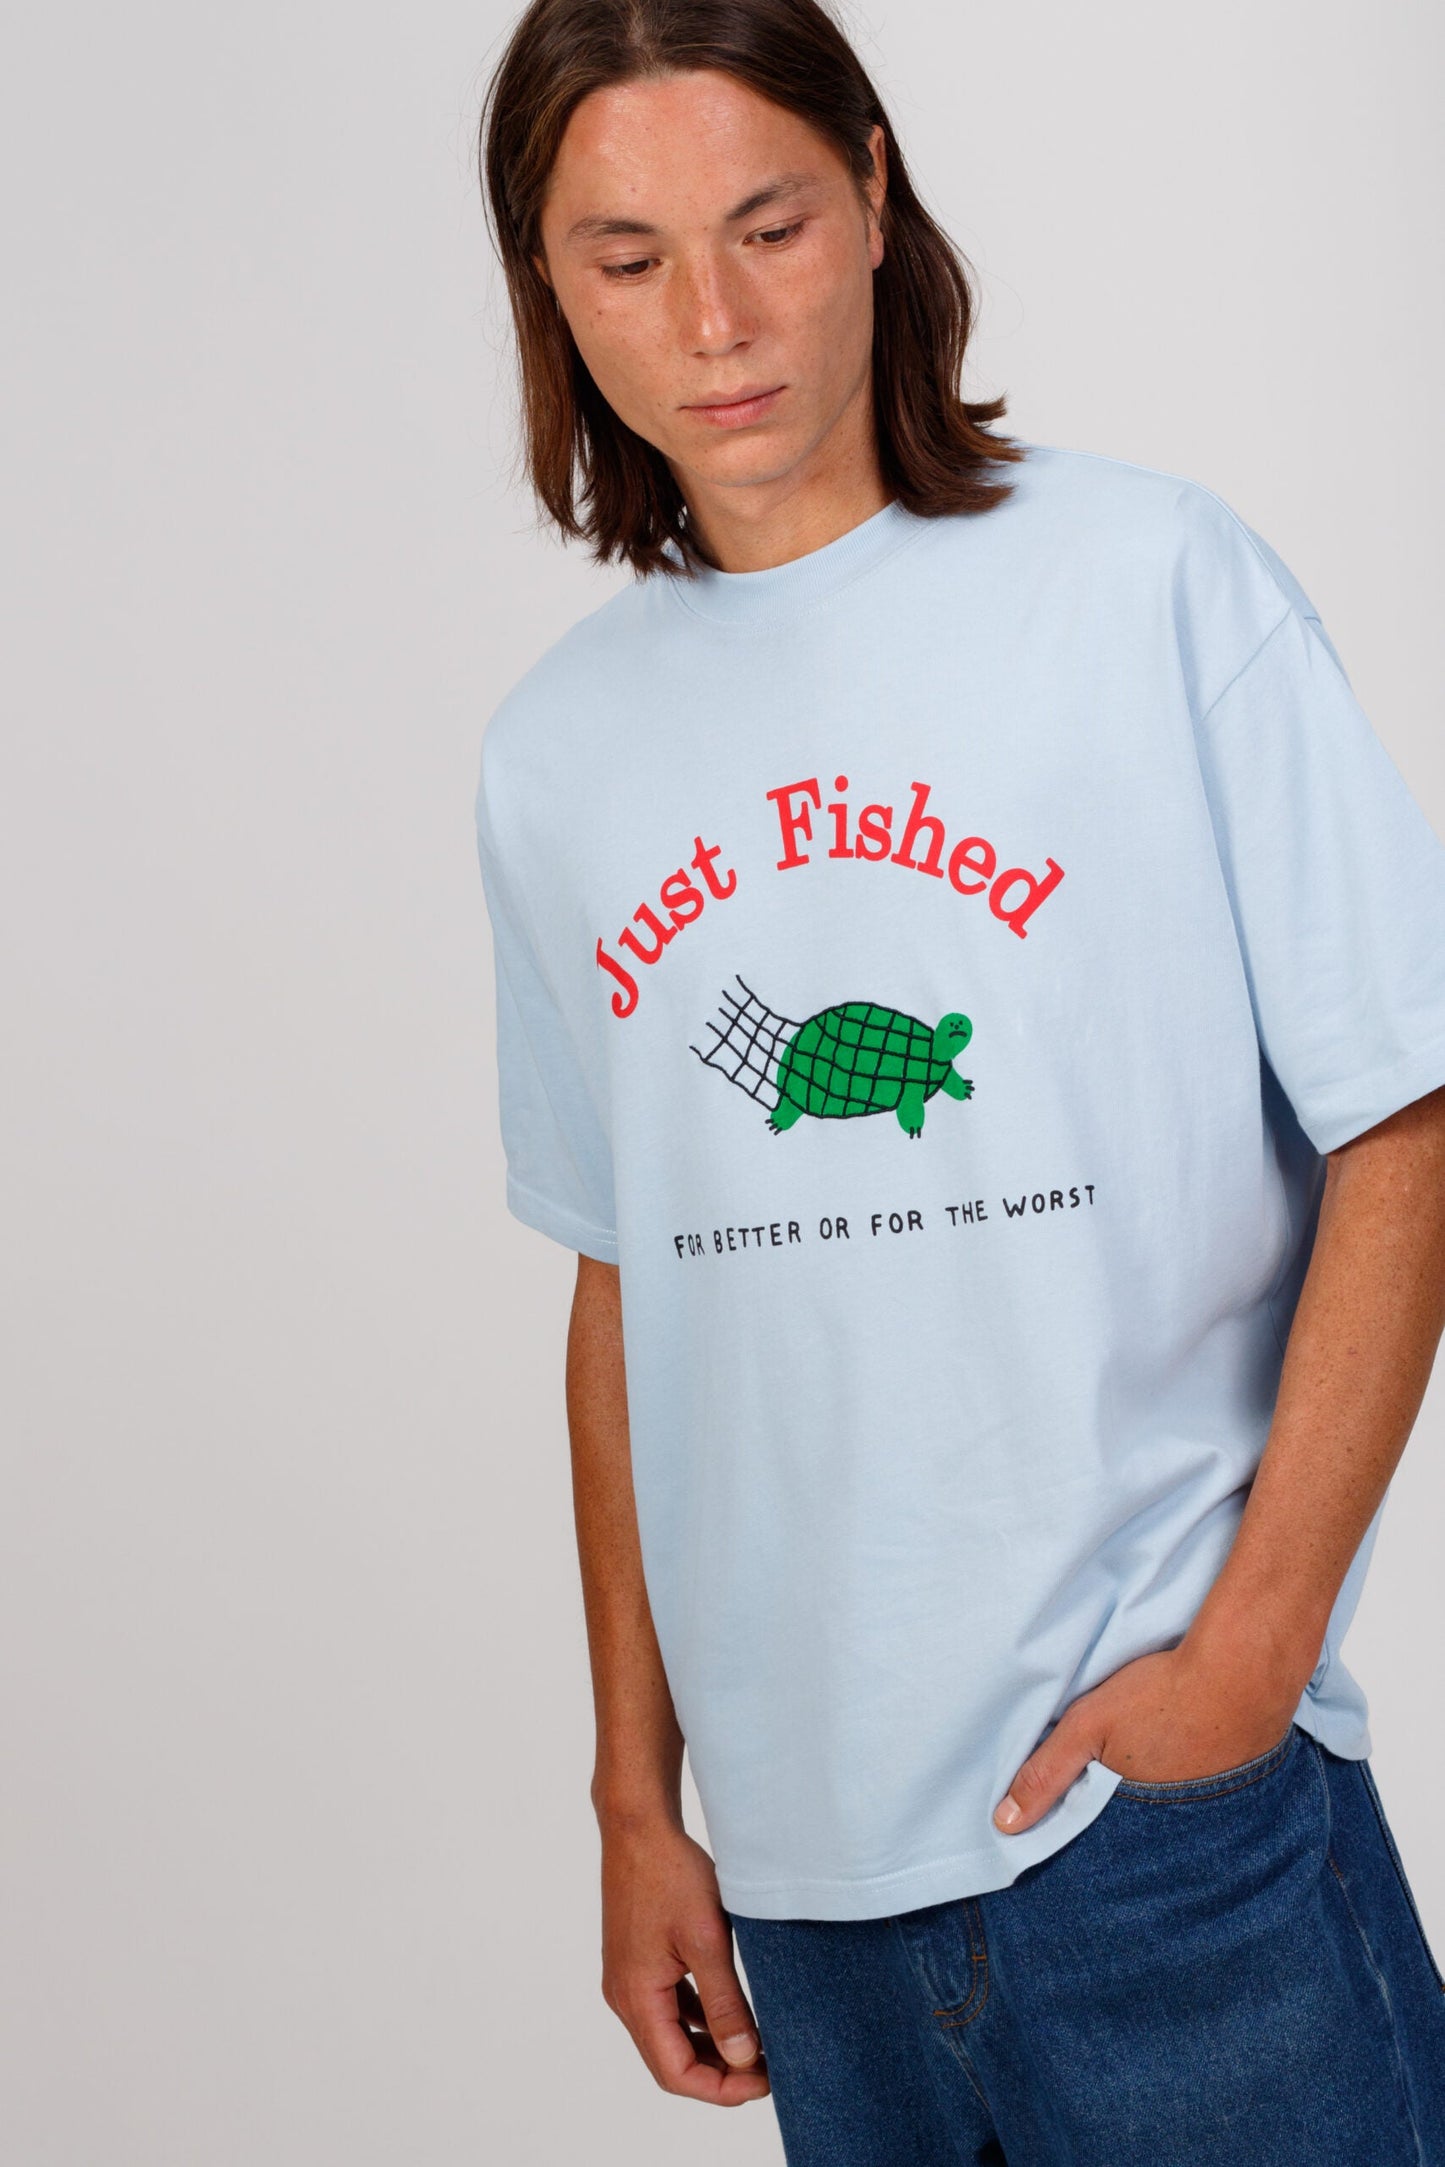 Just fished T-shirt